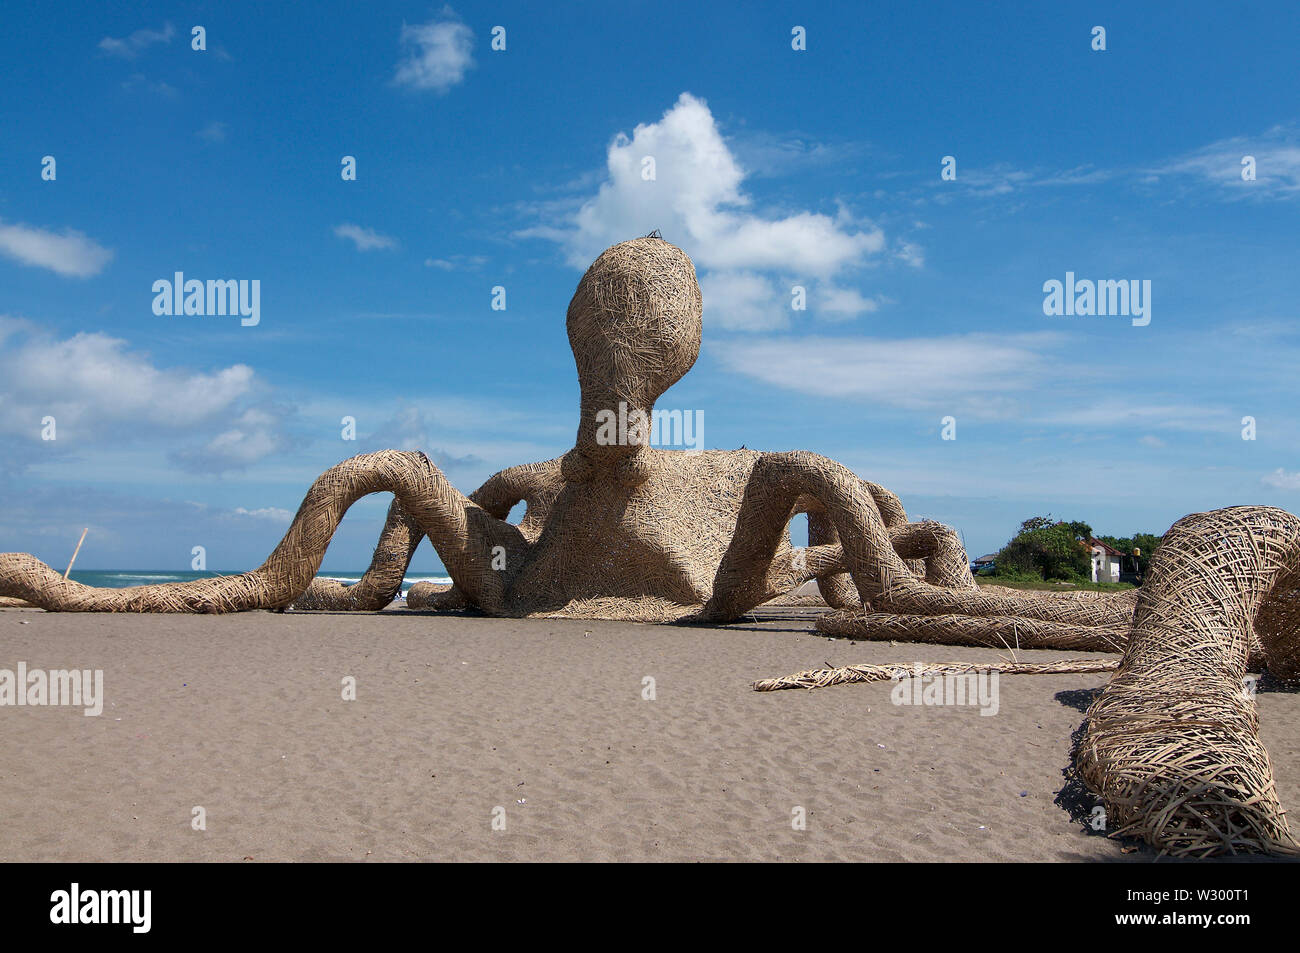 Picture of a giant Octopus installation made from Bamboo wood, located at the famous Berawa Beach in Canggu, Bali - Indonesia Stock Photo